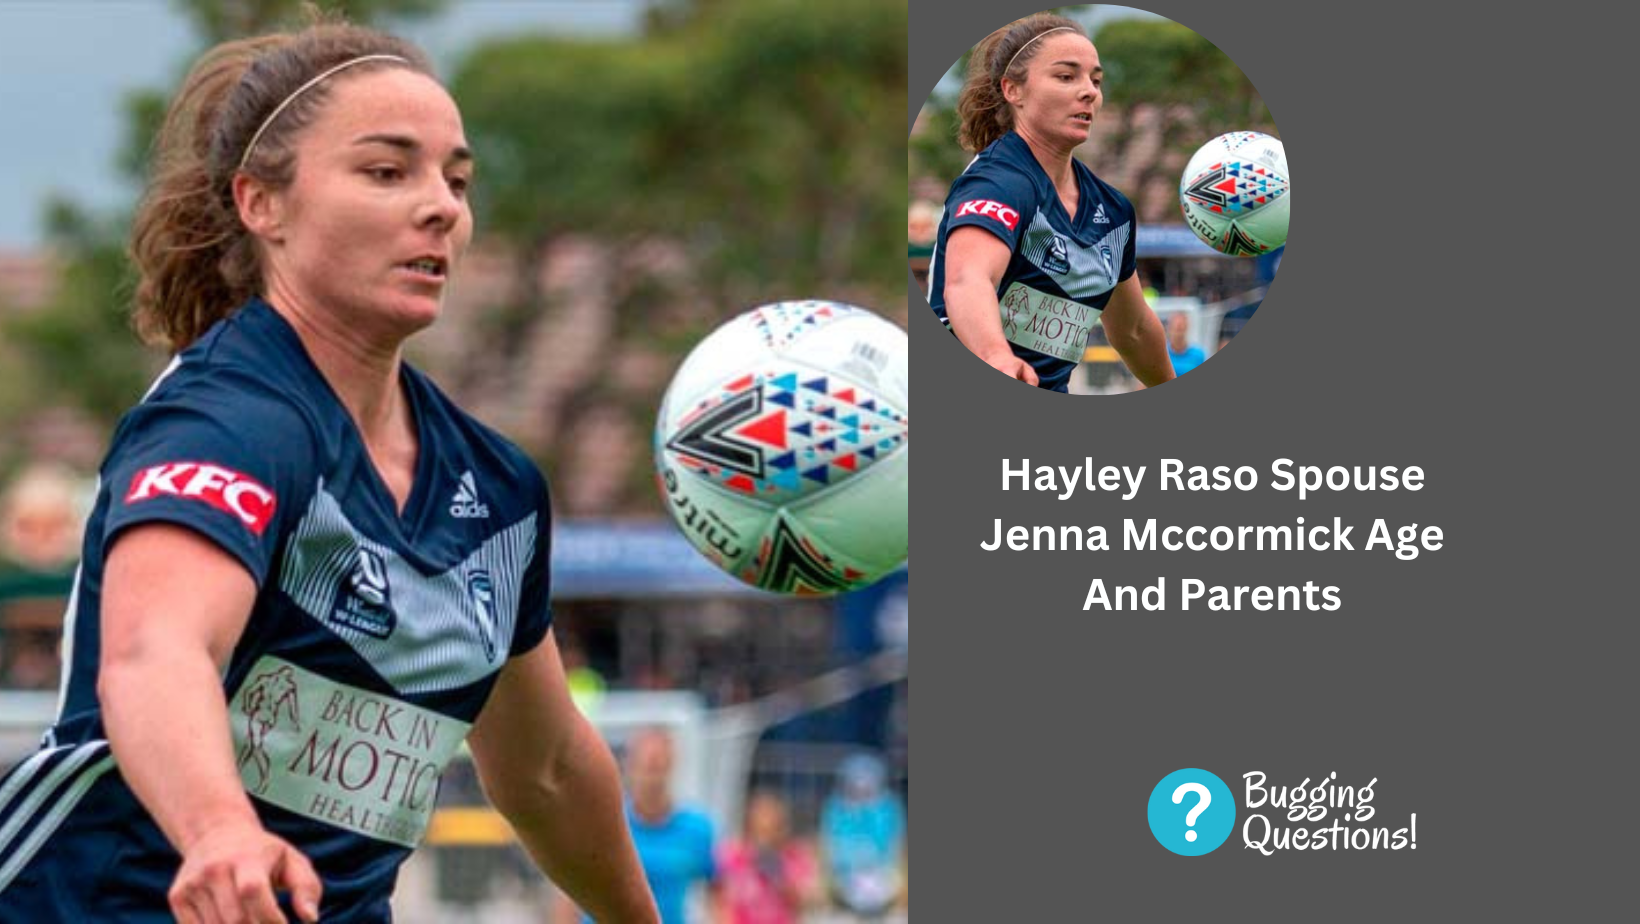 Hayley Raso Spouse Jenna Mccormick Age And Parents